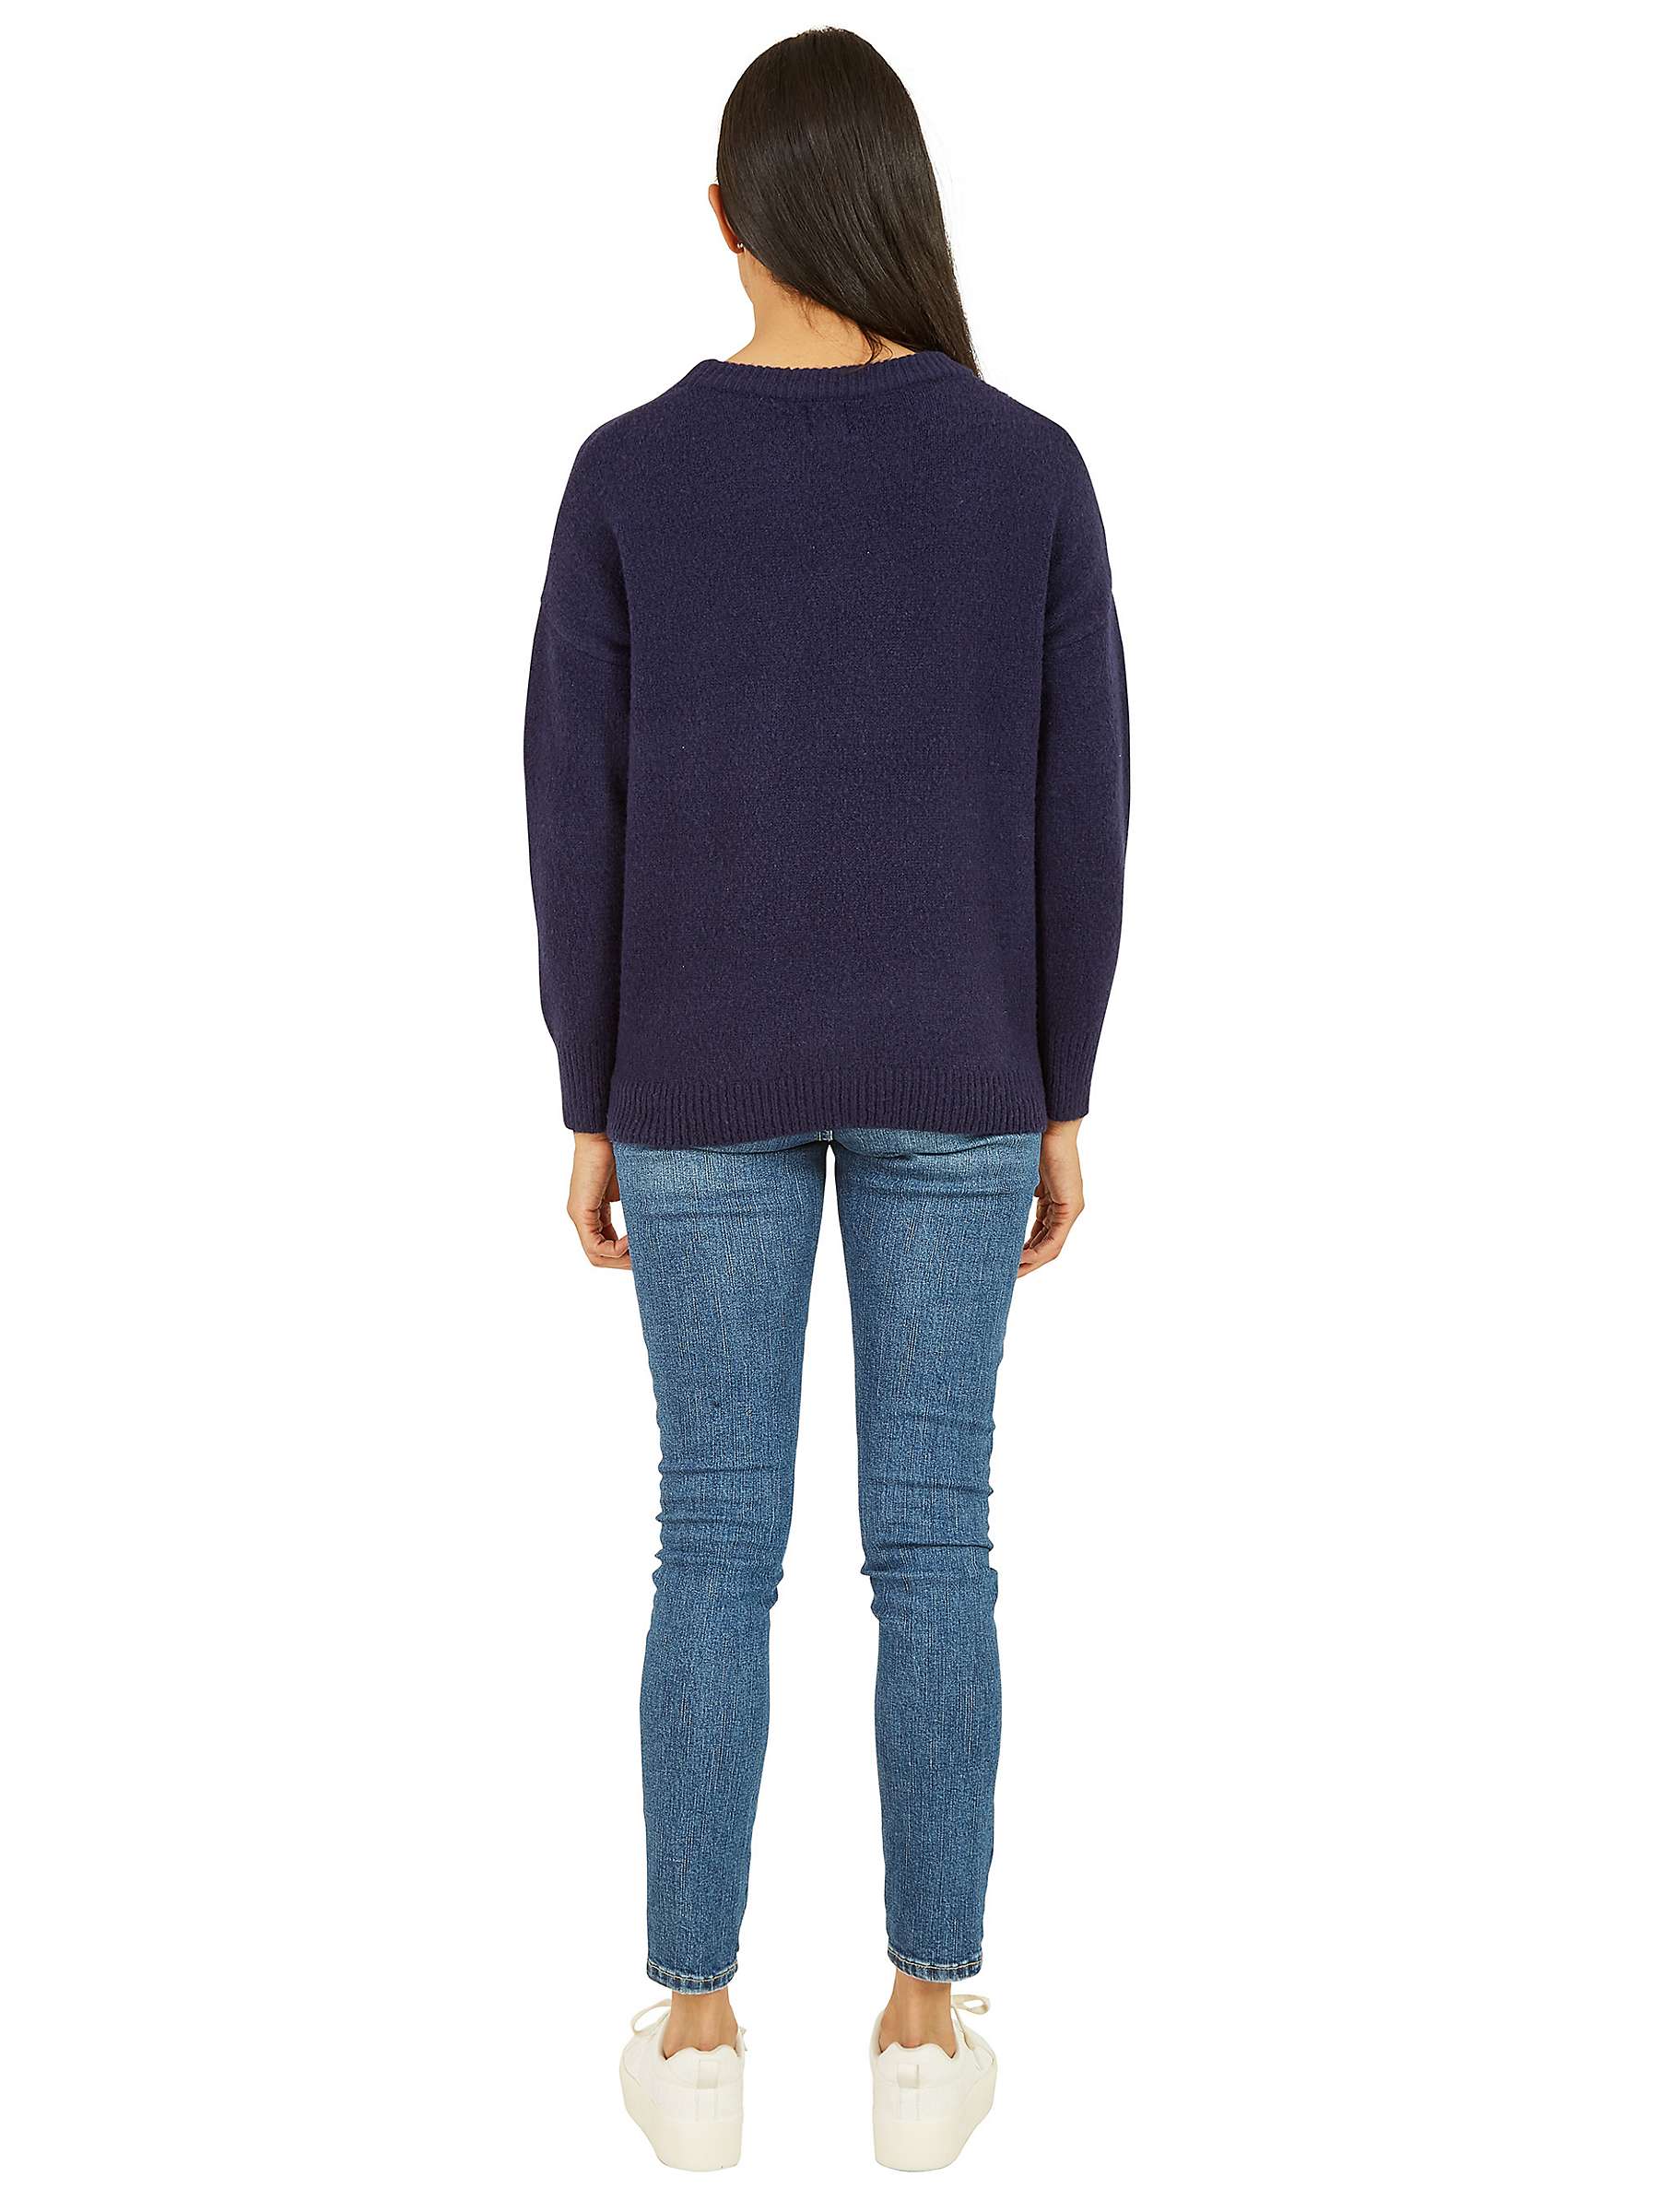 Buy Yumi Sequin Bow Knitted Jumper, Navy Online at johnlewis.com